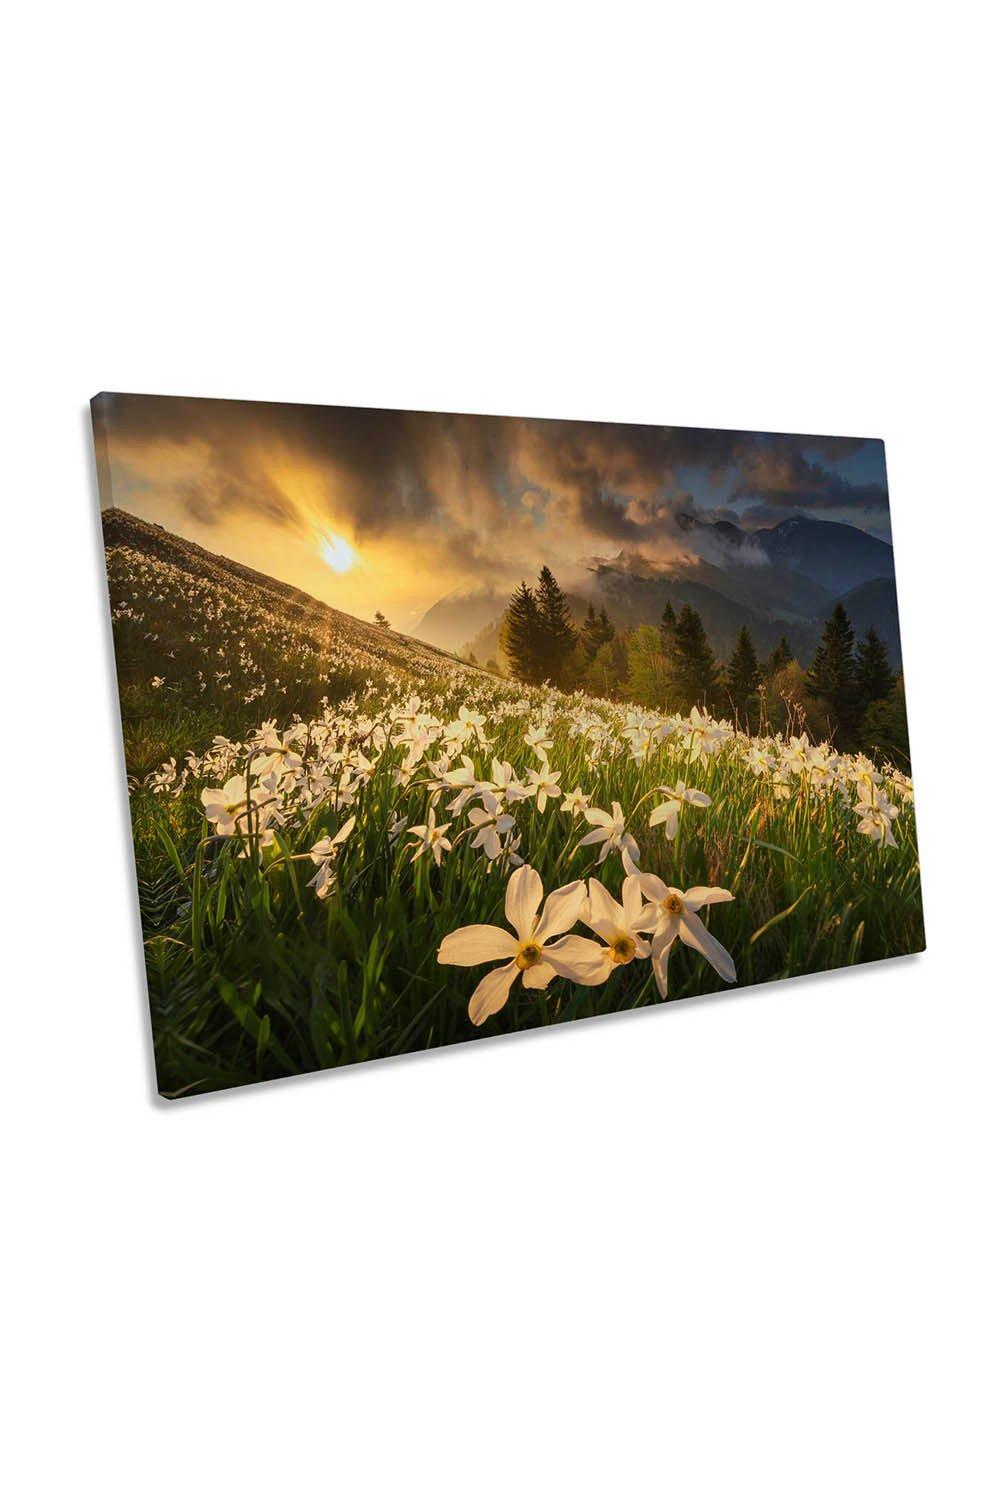 White Carpet of Flowers Spring Mountains Canvas Wall Art Picture Print